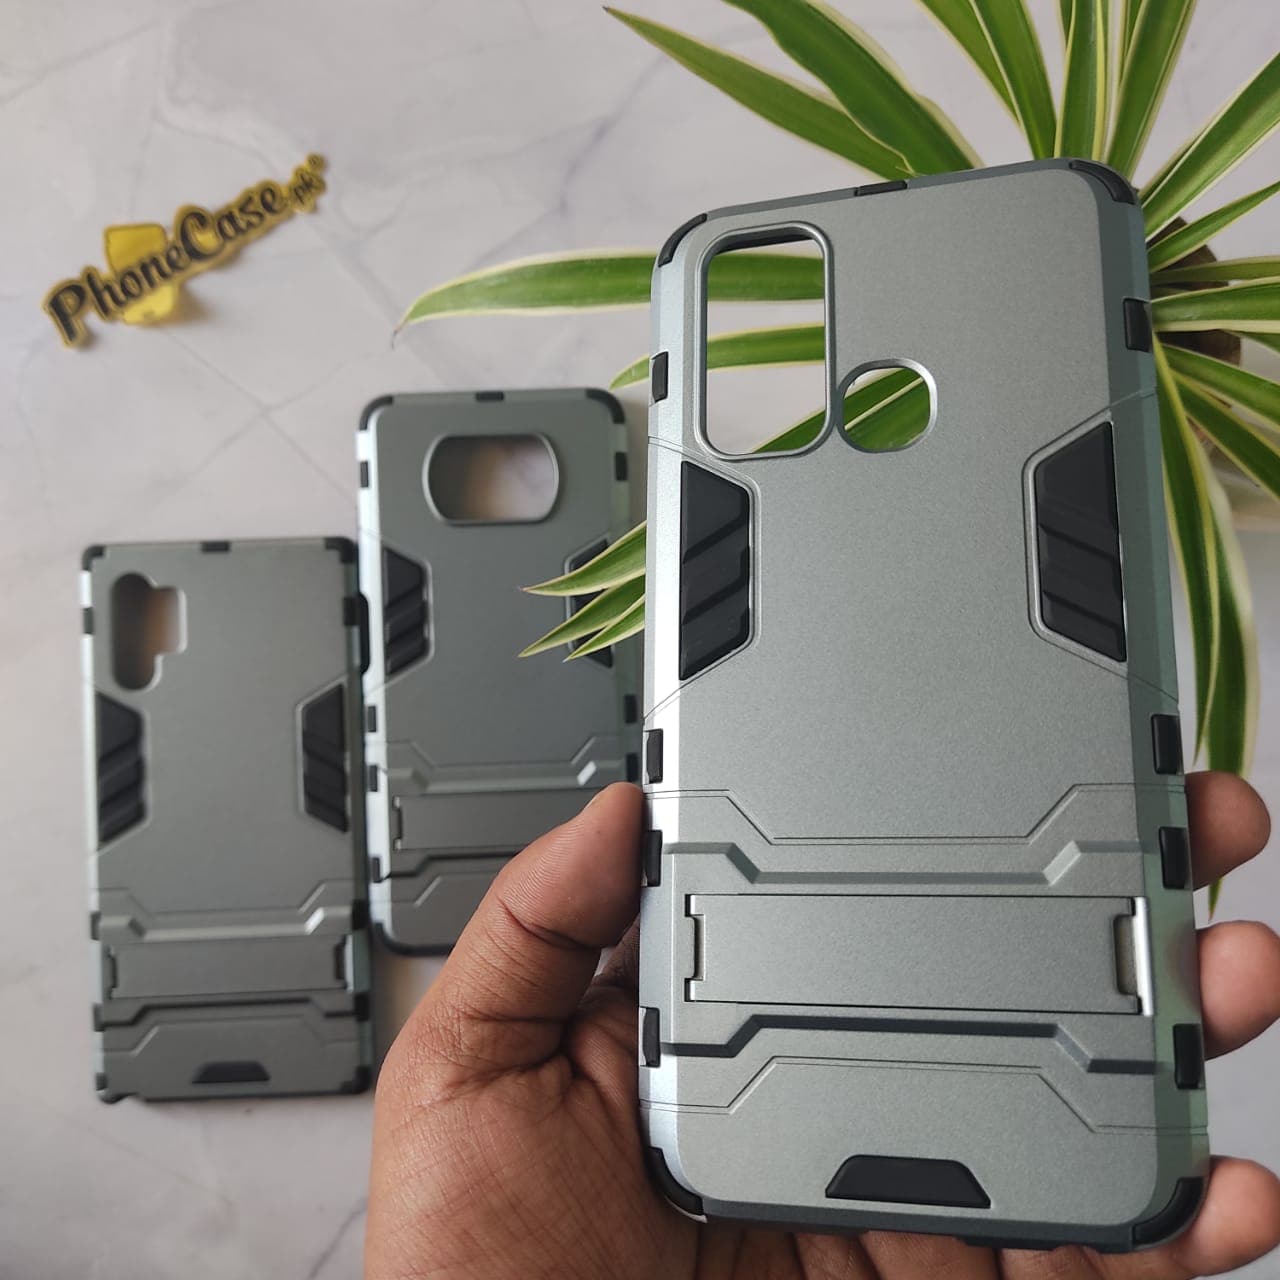 Hybrid iron man full protective cover+kick Stand for VIVO